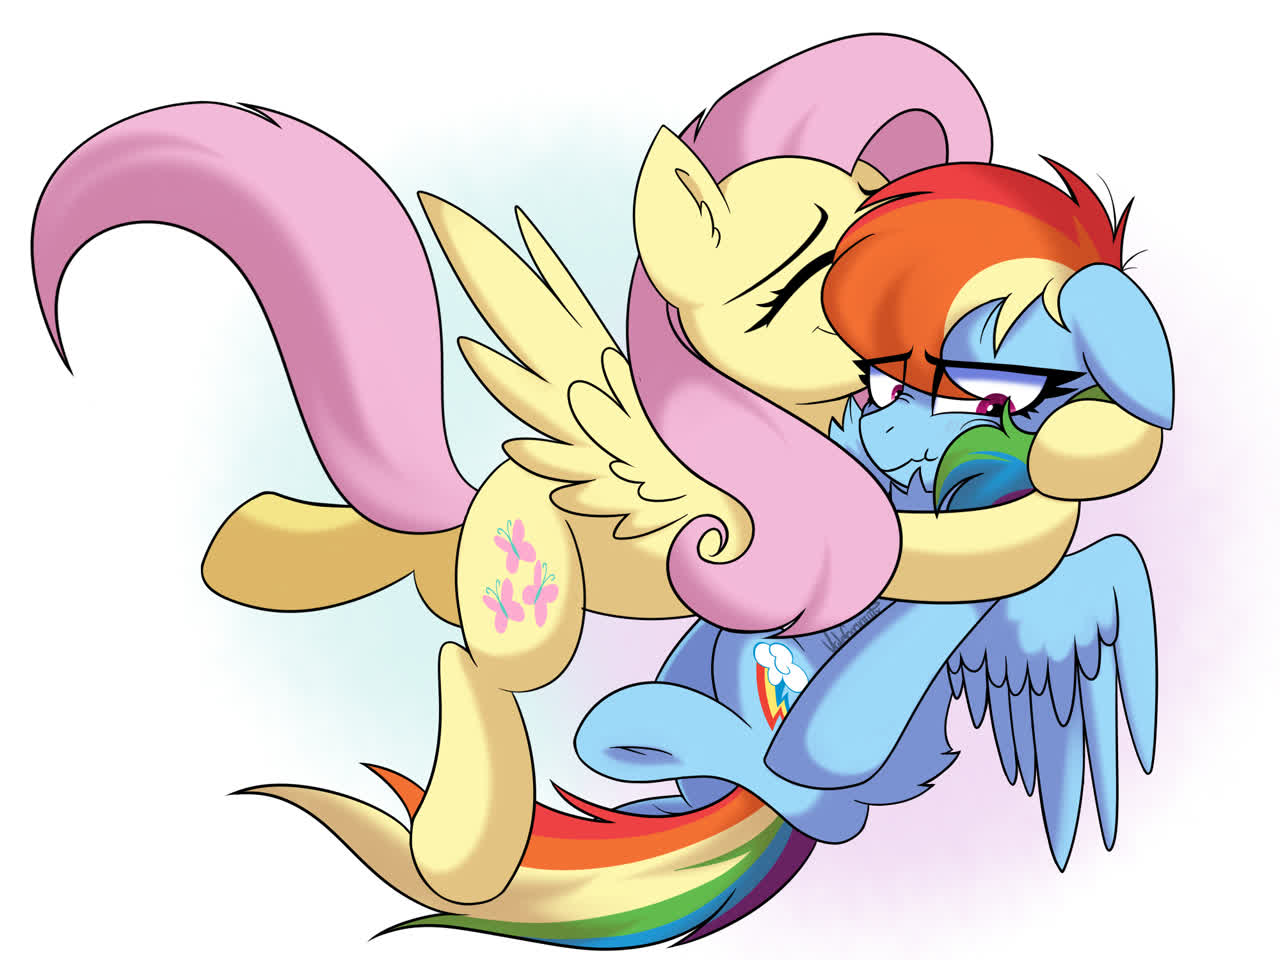 Fluttershy X Rainbow Dash shipping. ears drooping from the perky upright po...